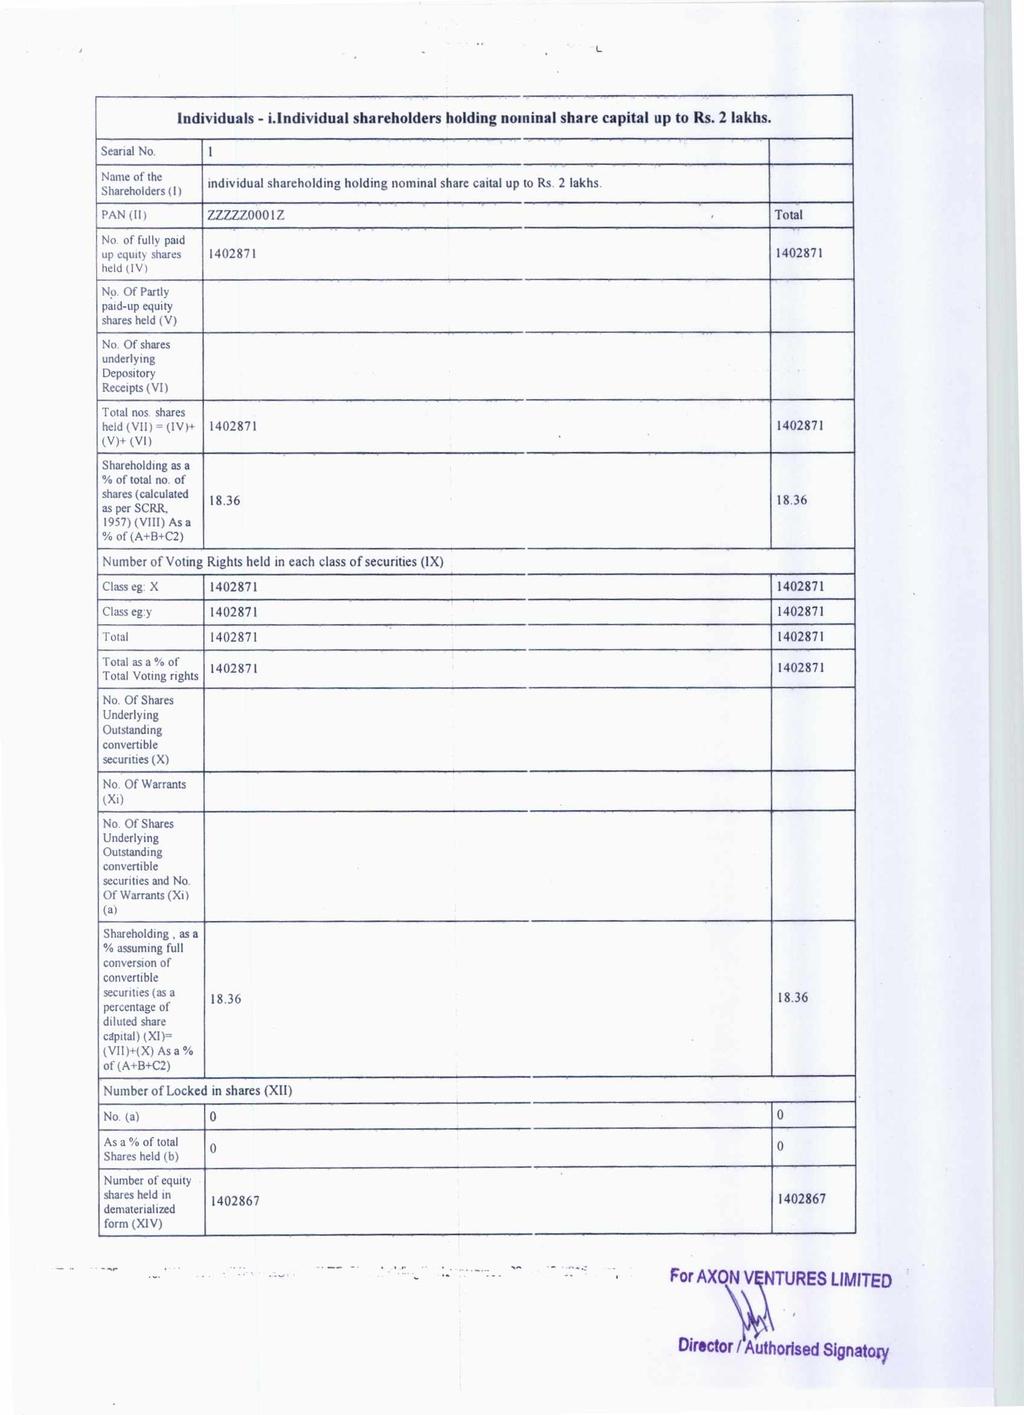 Searial No. 1 Individuals - Undividual shareholders holding nominal share capital up to Rs. 2 lakhs. Name of the Shareholders (1) individual shareholding holding nominal share caital up to Rs.